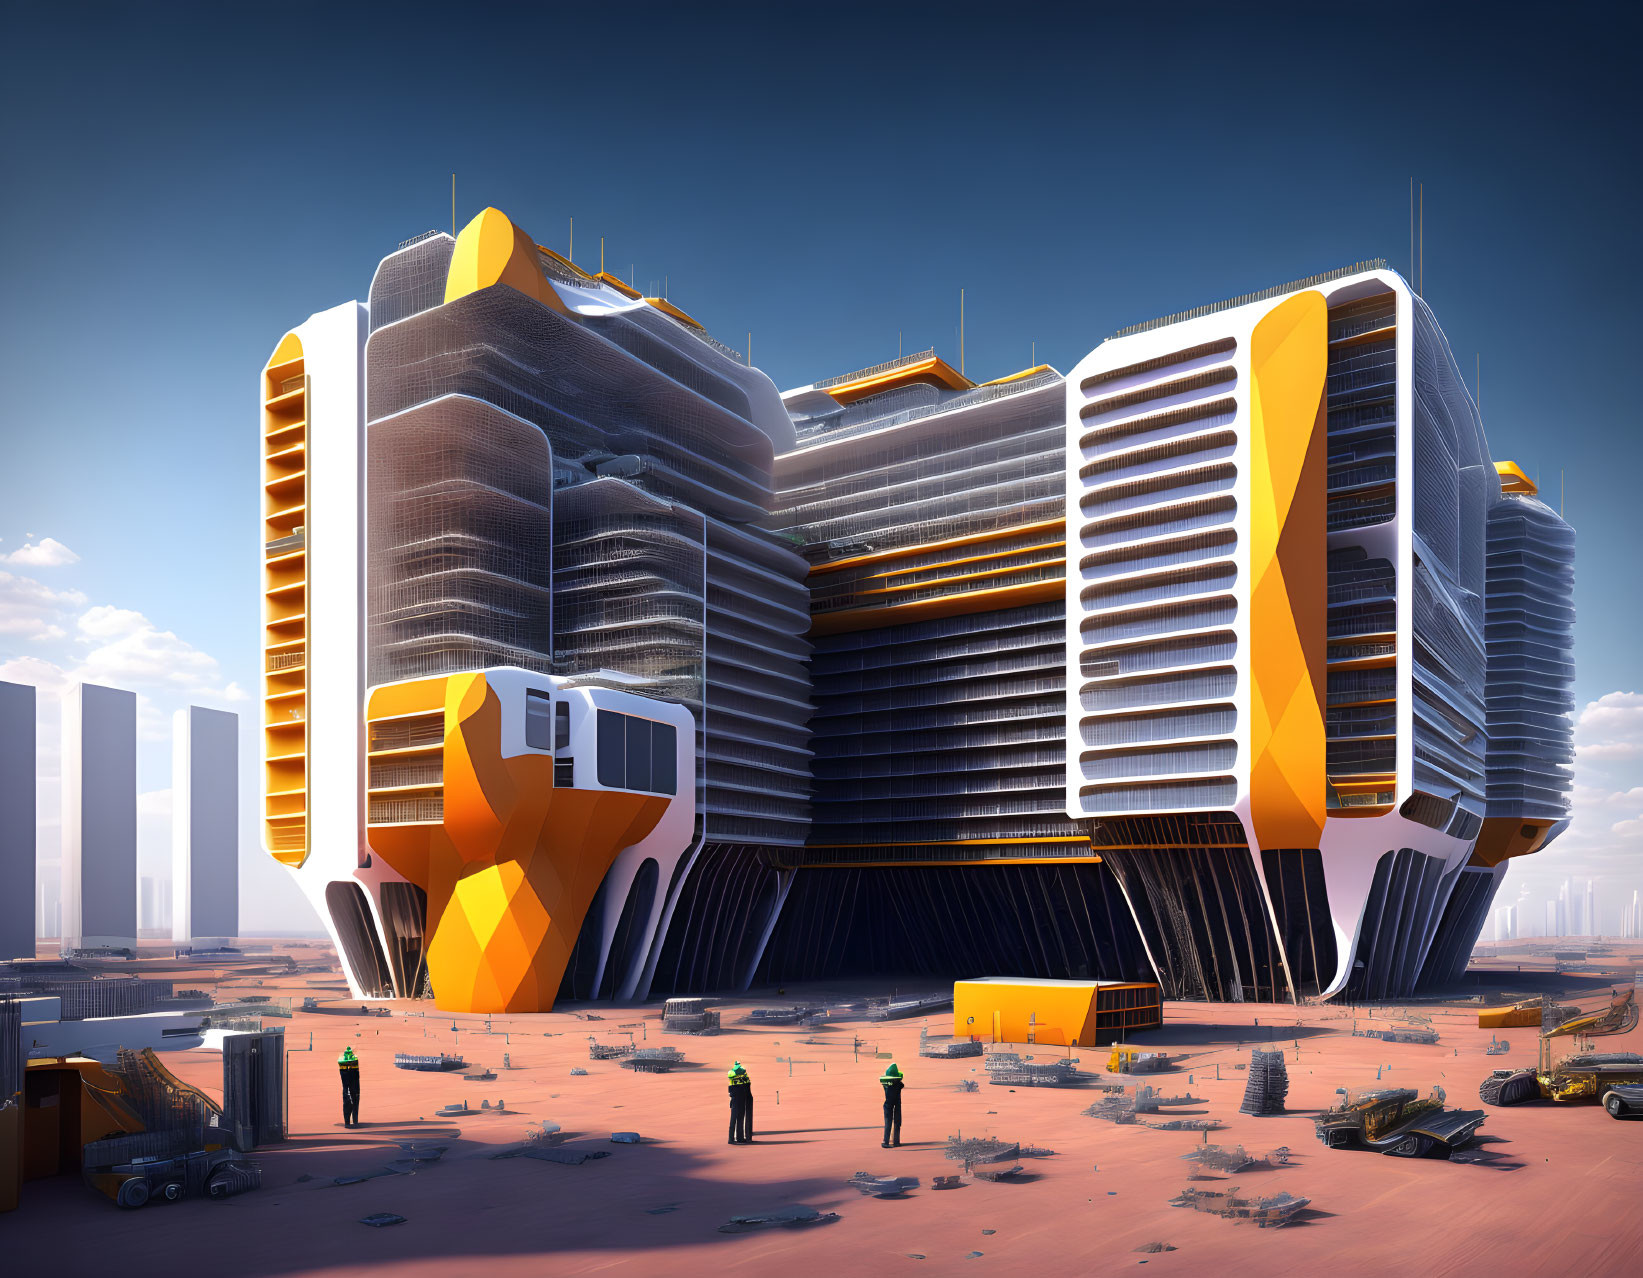 Modern desert cityscape with orange and gray architecture, bustling with people and flying cars.